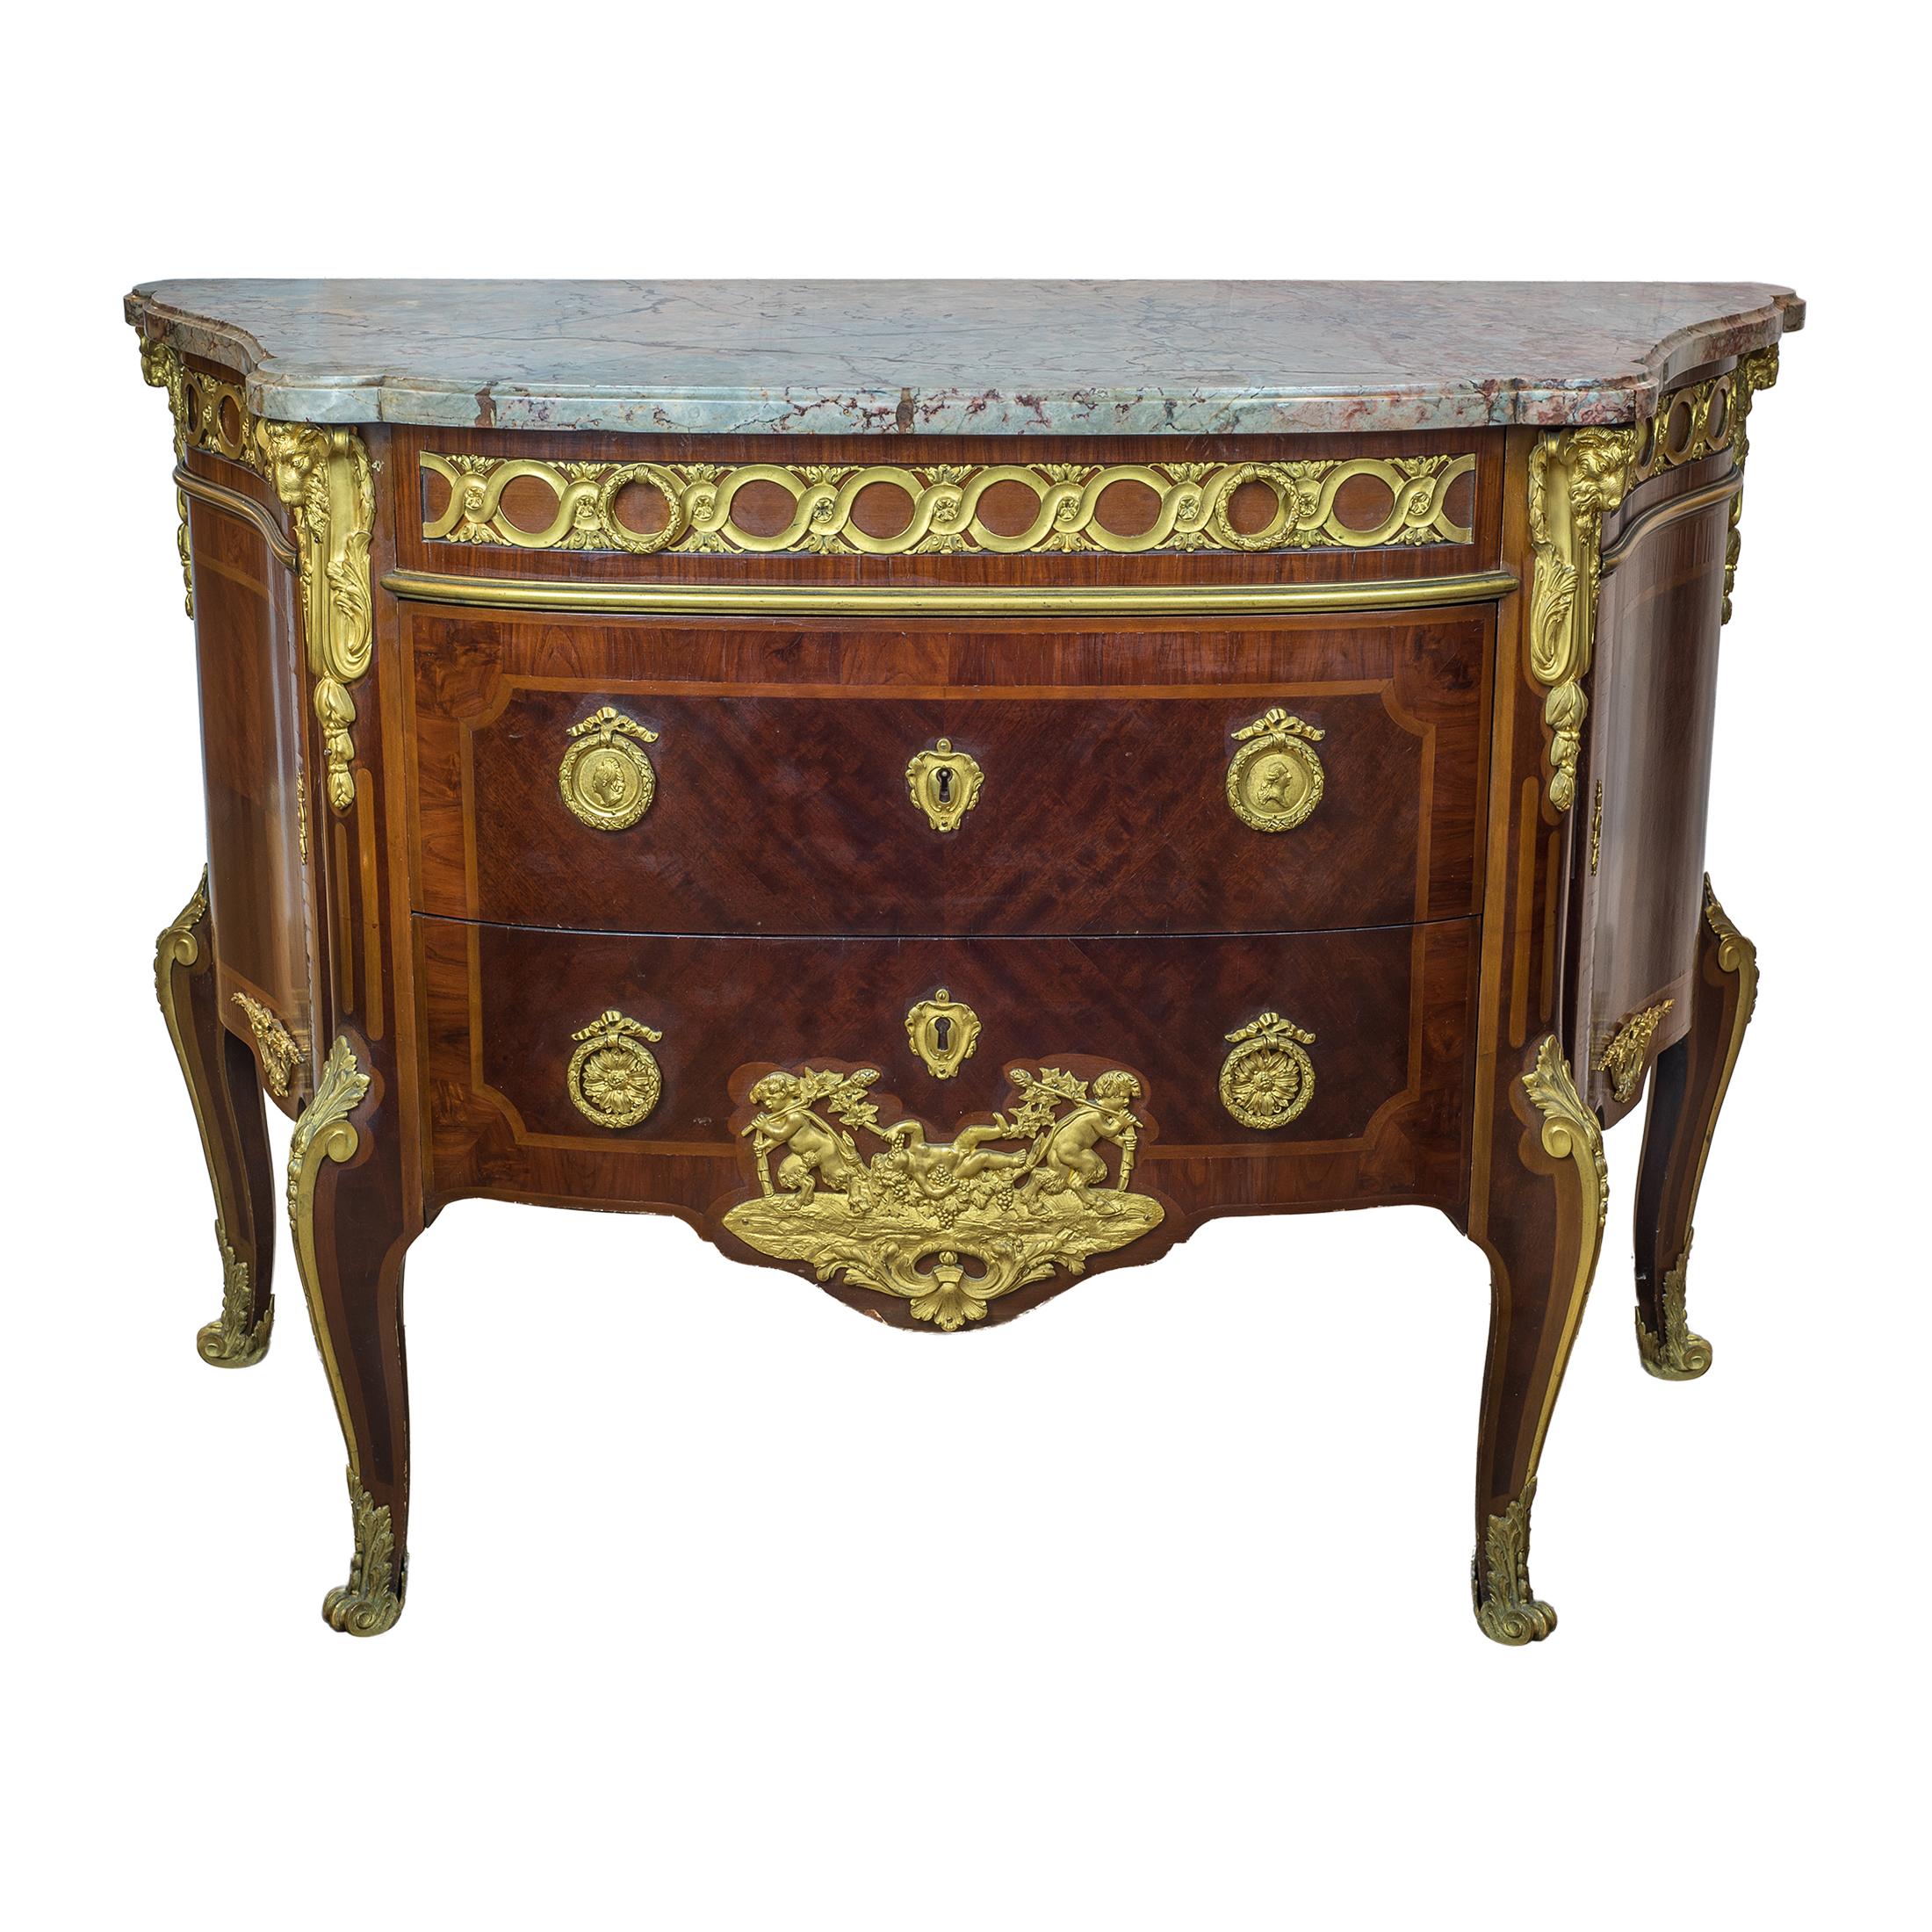 An exceptional pair of gilt bronze-mounted bas satin tulipwood and amaranth commode with serpentine fronted marble-top above a single frieze drawer and two long sans transverse. Each side fitted with a cupboard door opening to a single small shelf.